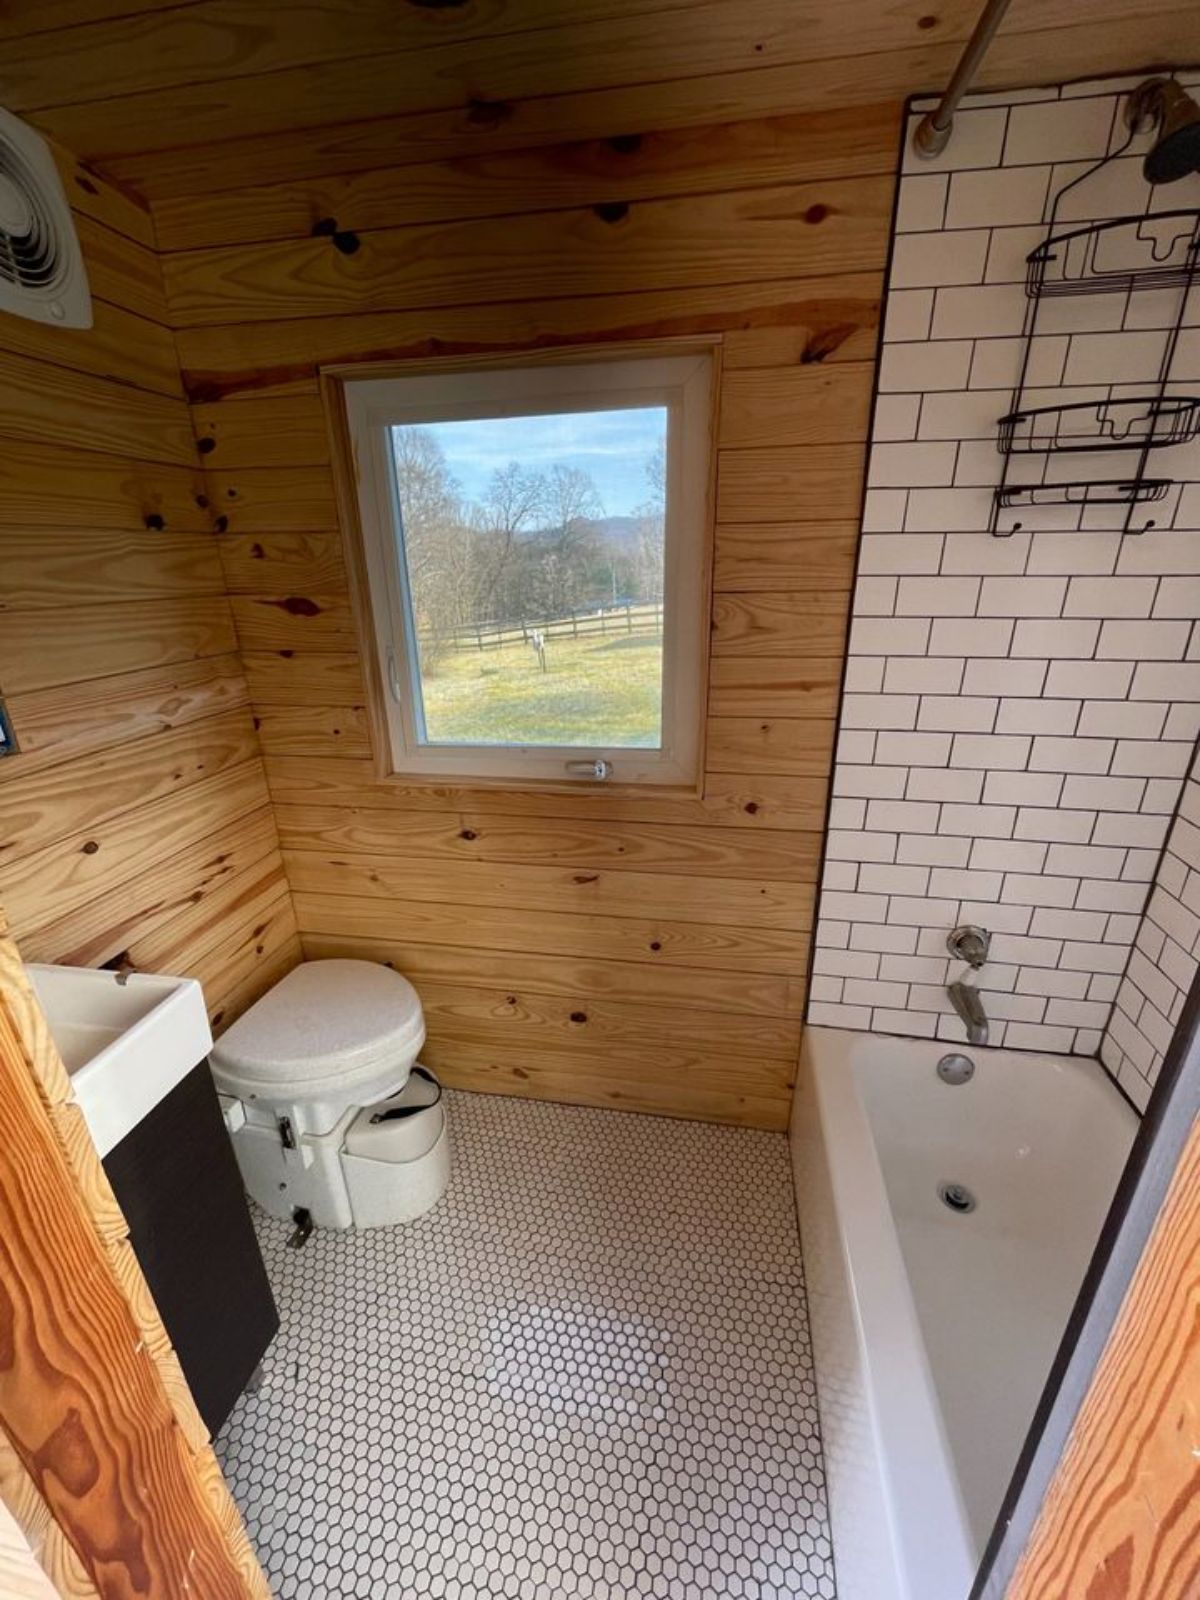 Bathroom of 24’ Tiny House on Wheels  has a wonderful interior with standard toilet, sink and a bathtub